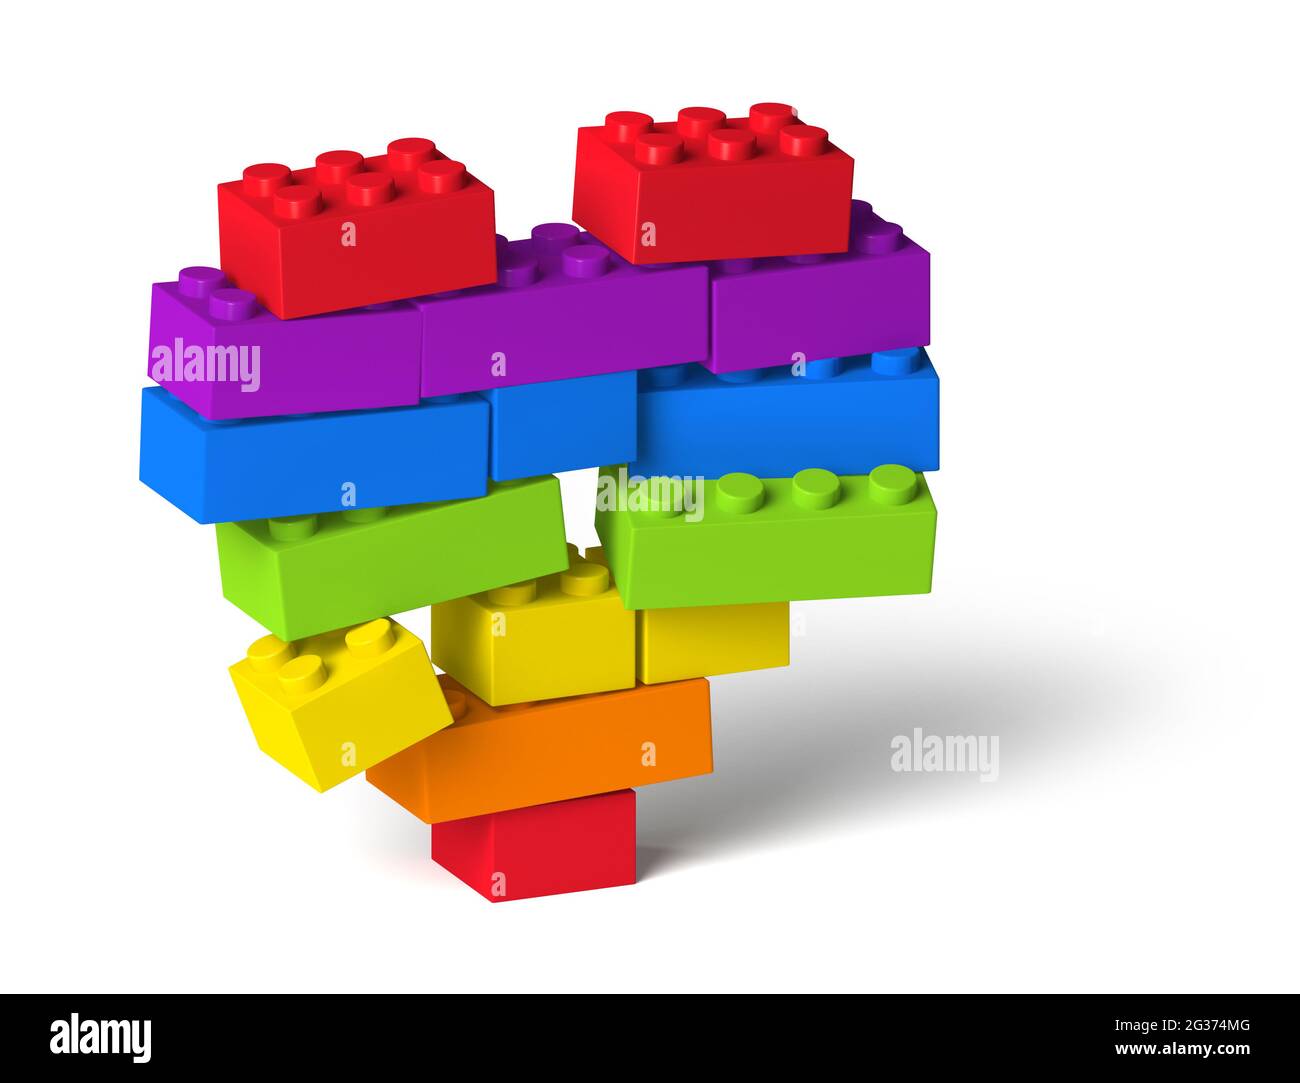 Rainbow color heart break 3d symbol collapsing, built of colorful toy building block tiles, isolated on white, drop shadow Stock Photo